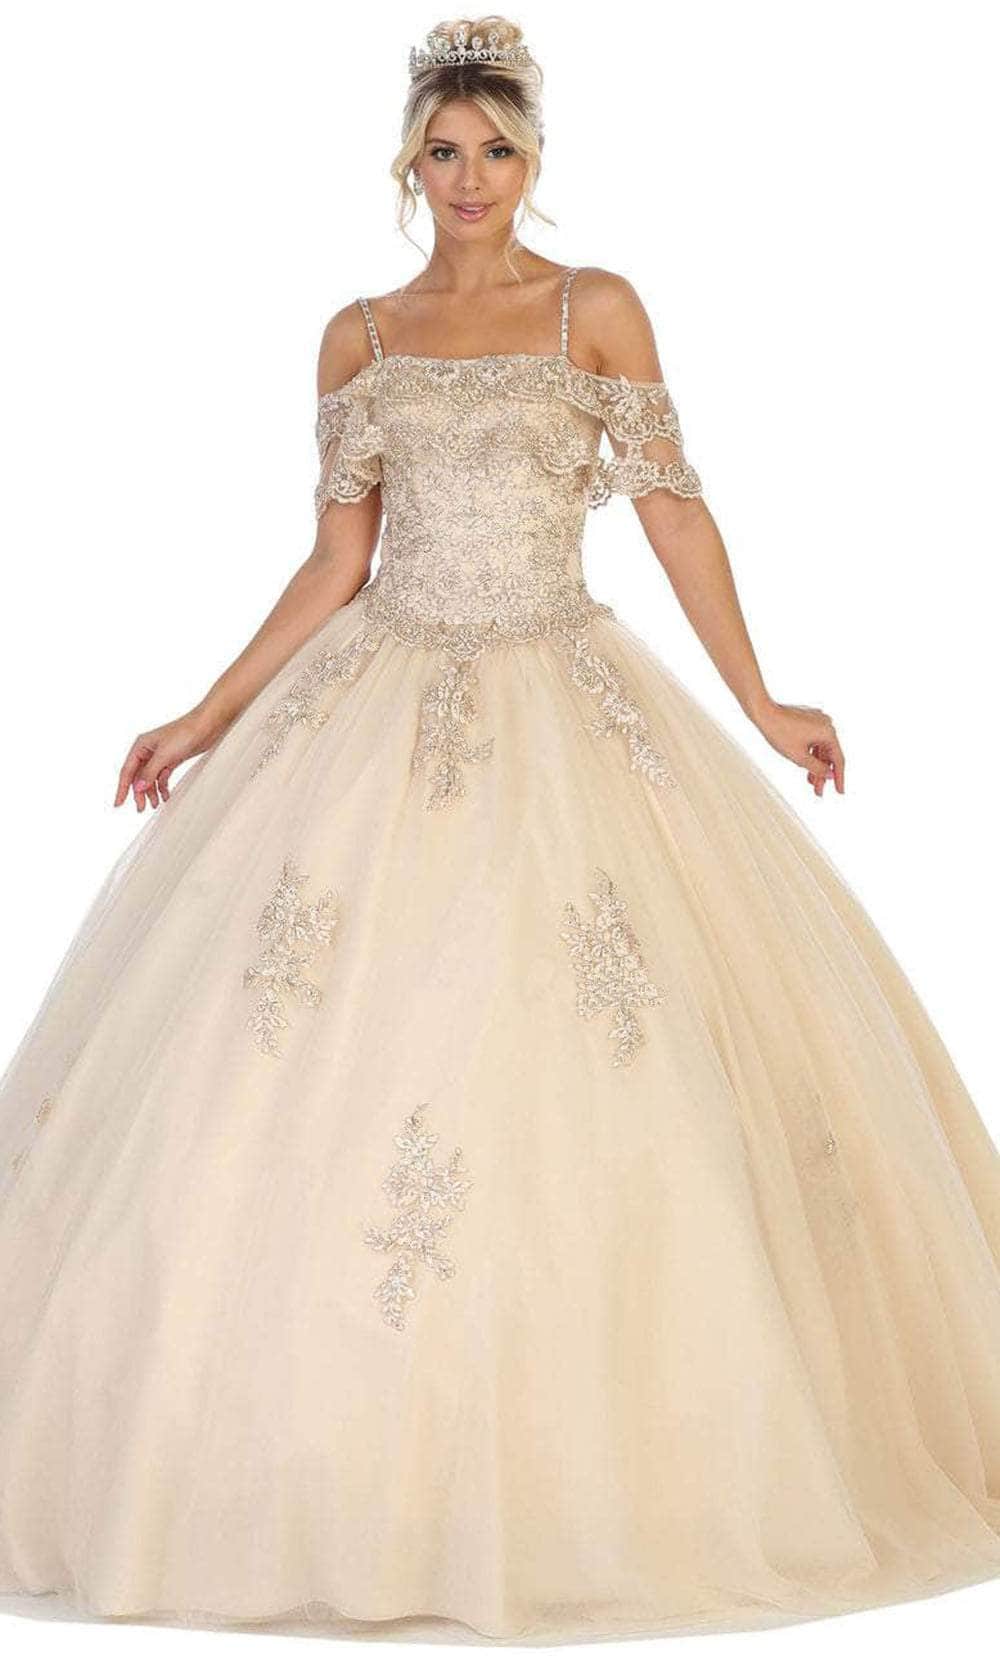 May Queen LK113 - Off Shoulder Floral Applique Ballgown Ball Gowns 4 / Champagne